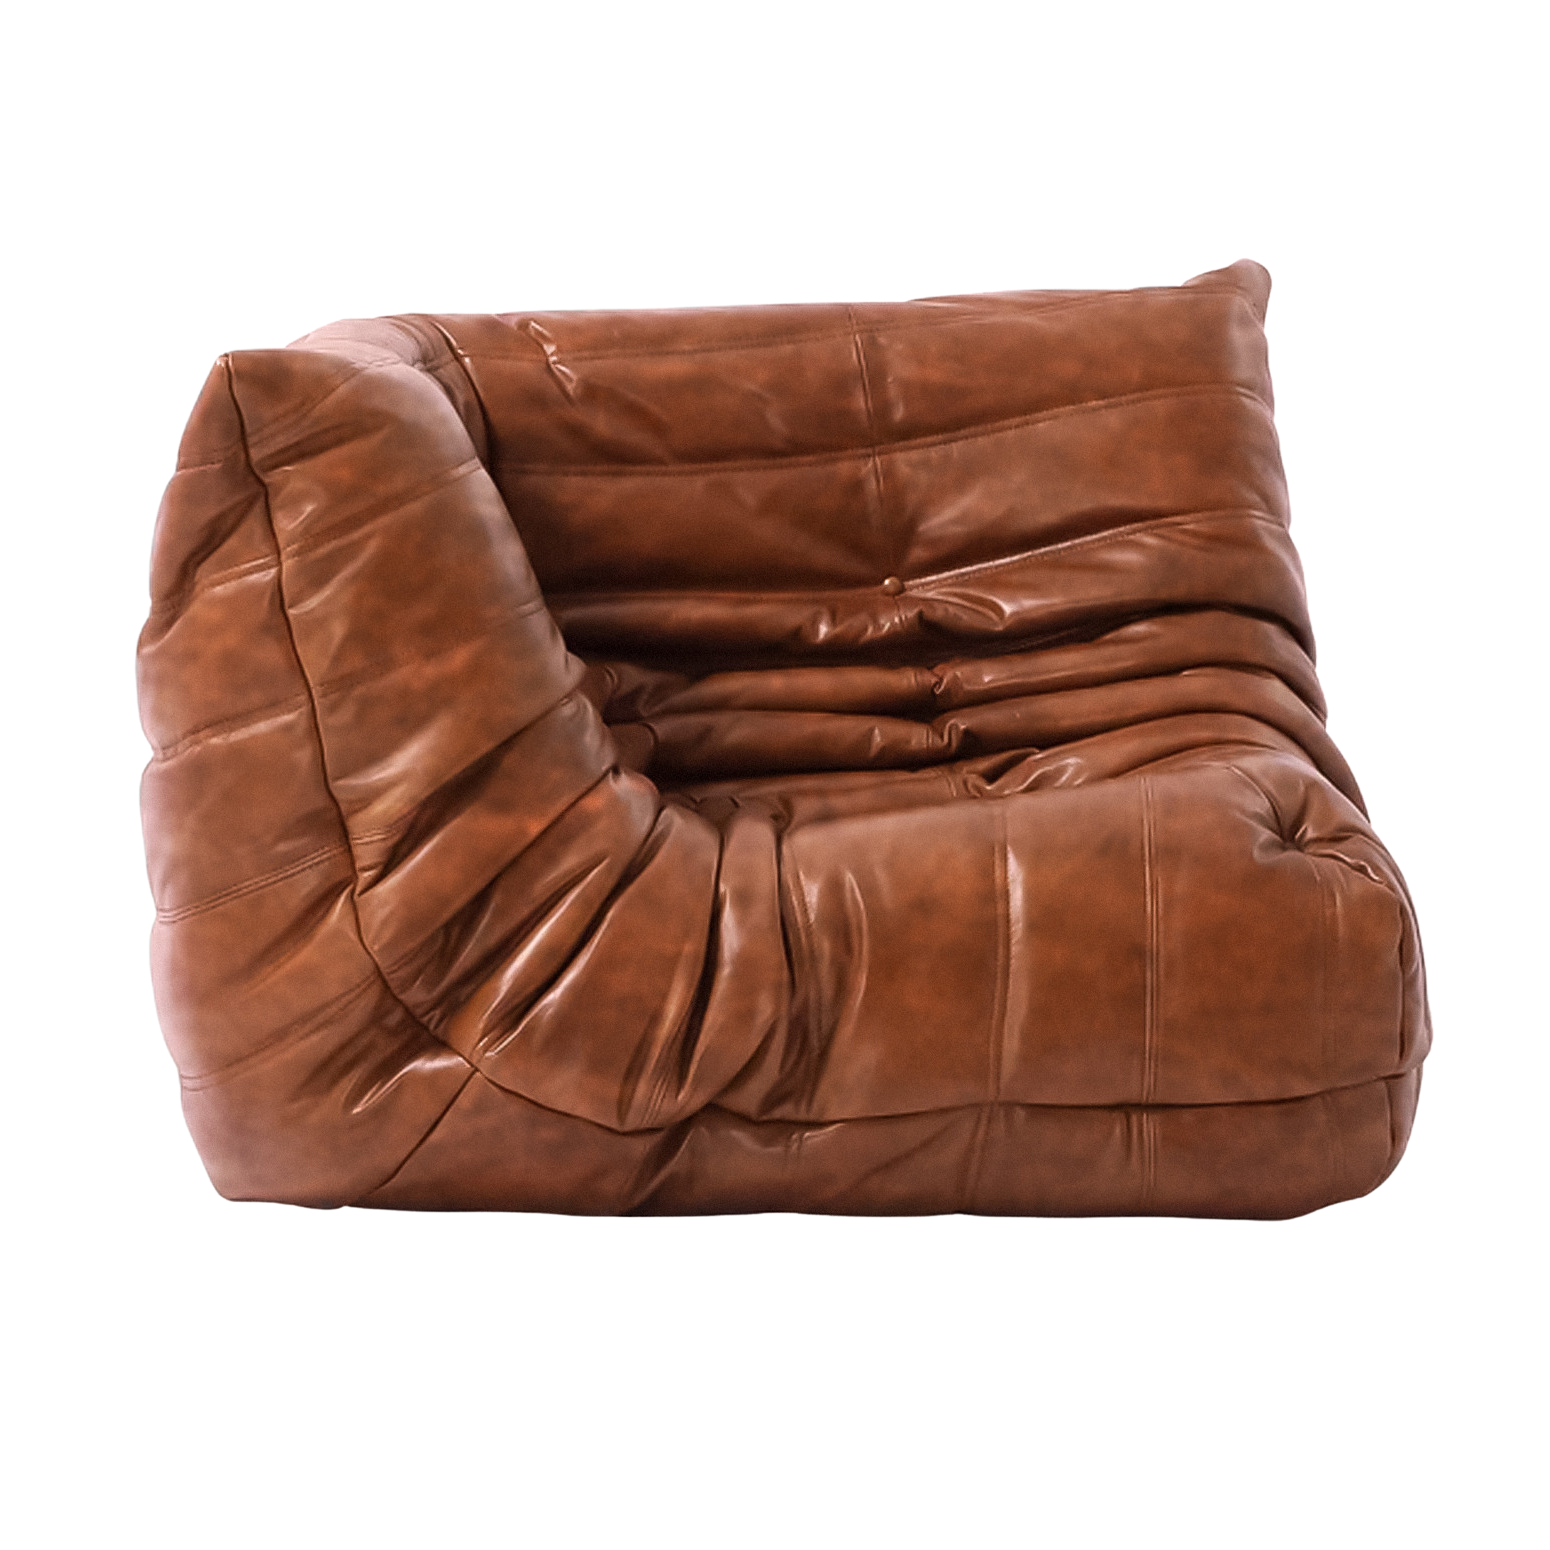 Leather Ducaroy chair, Ducaroy Lounge Chair High Quality